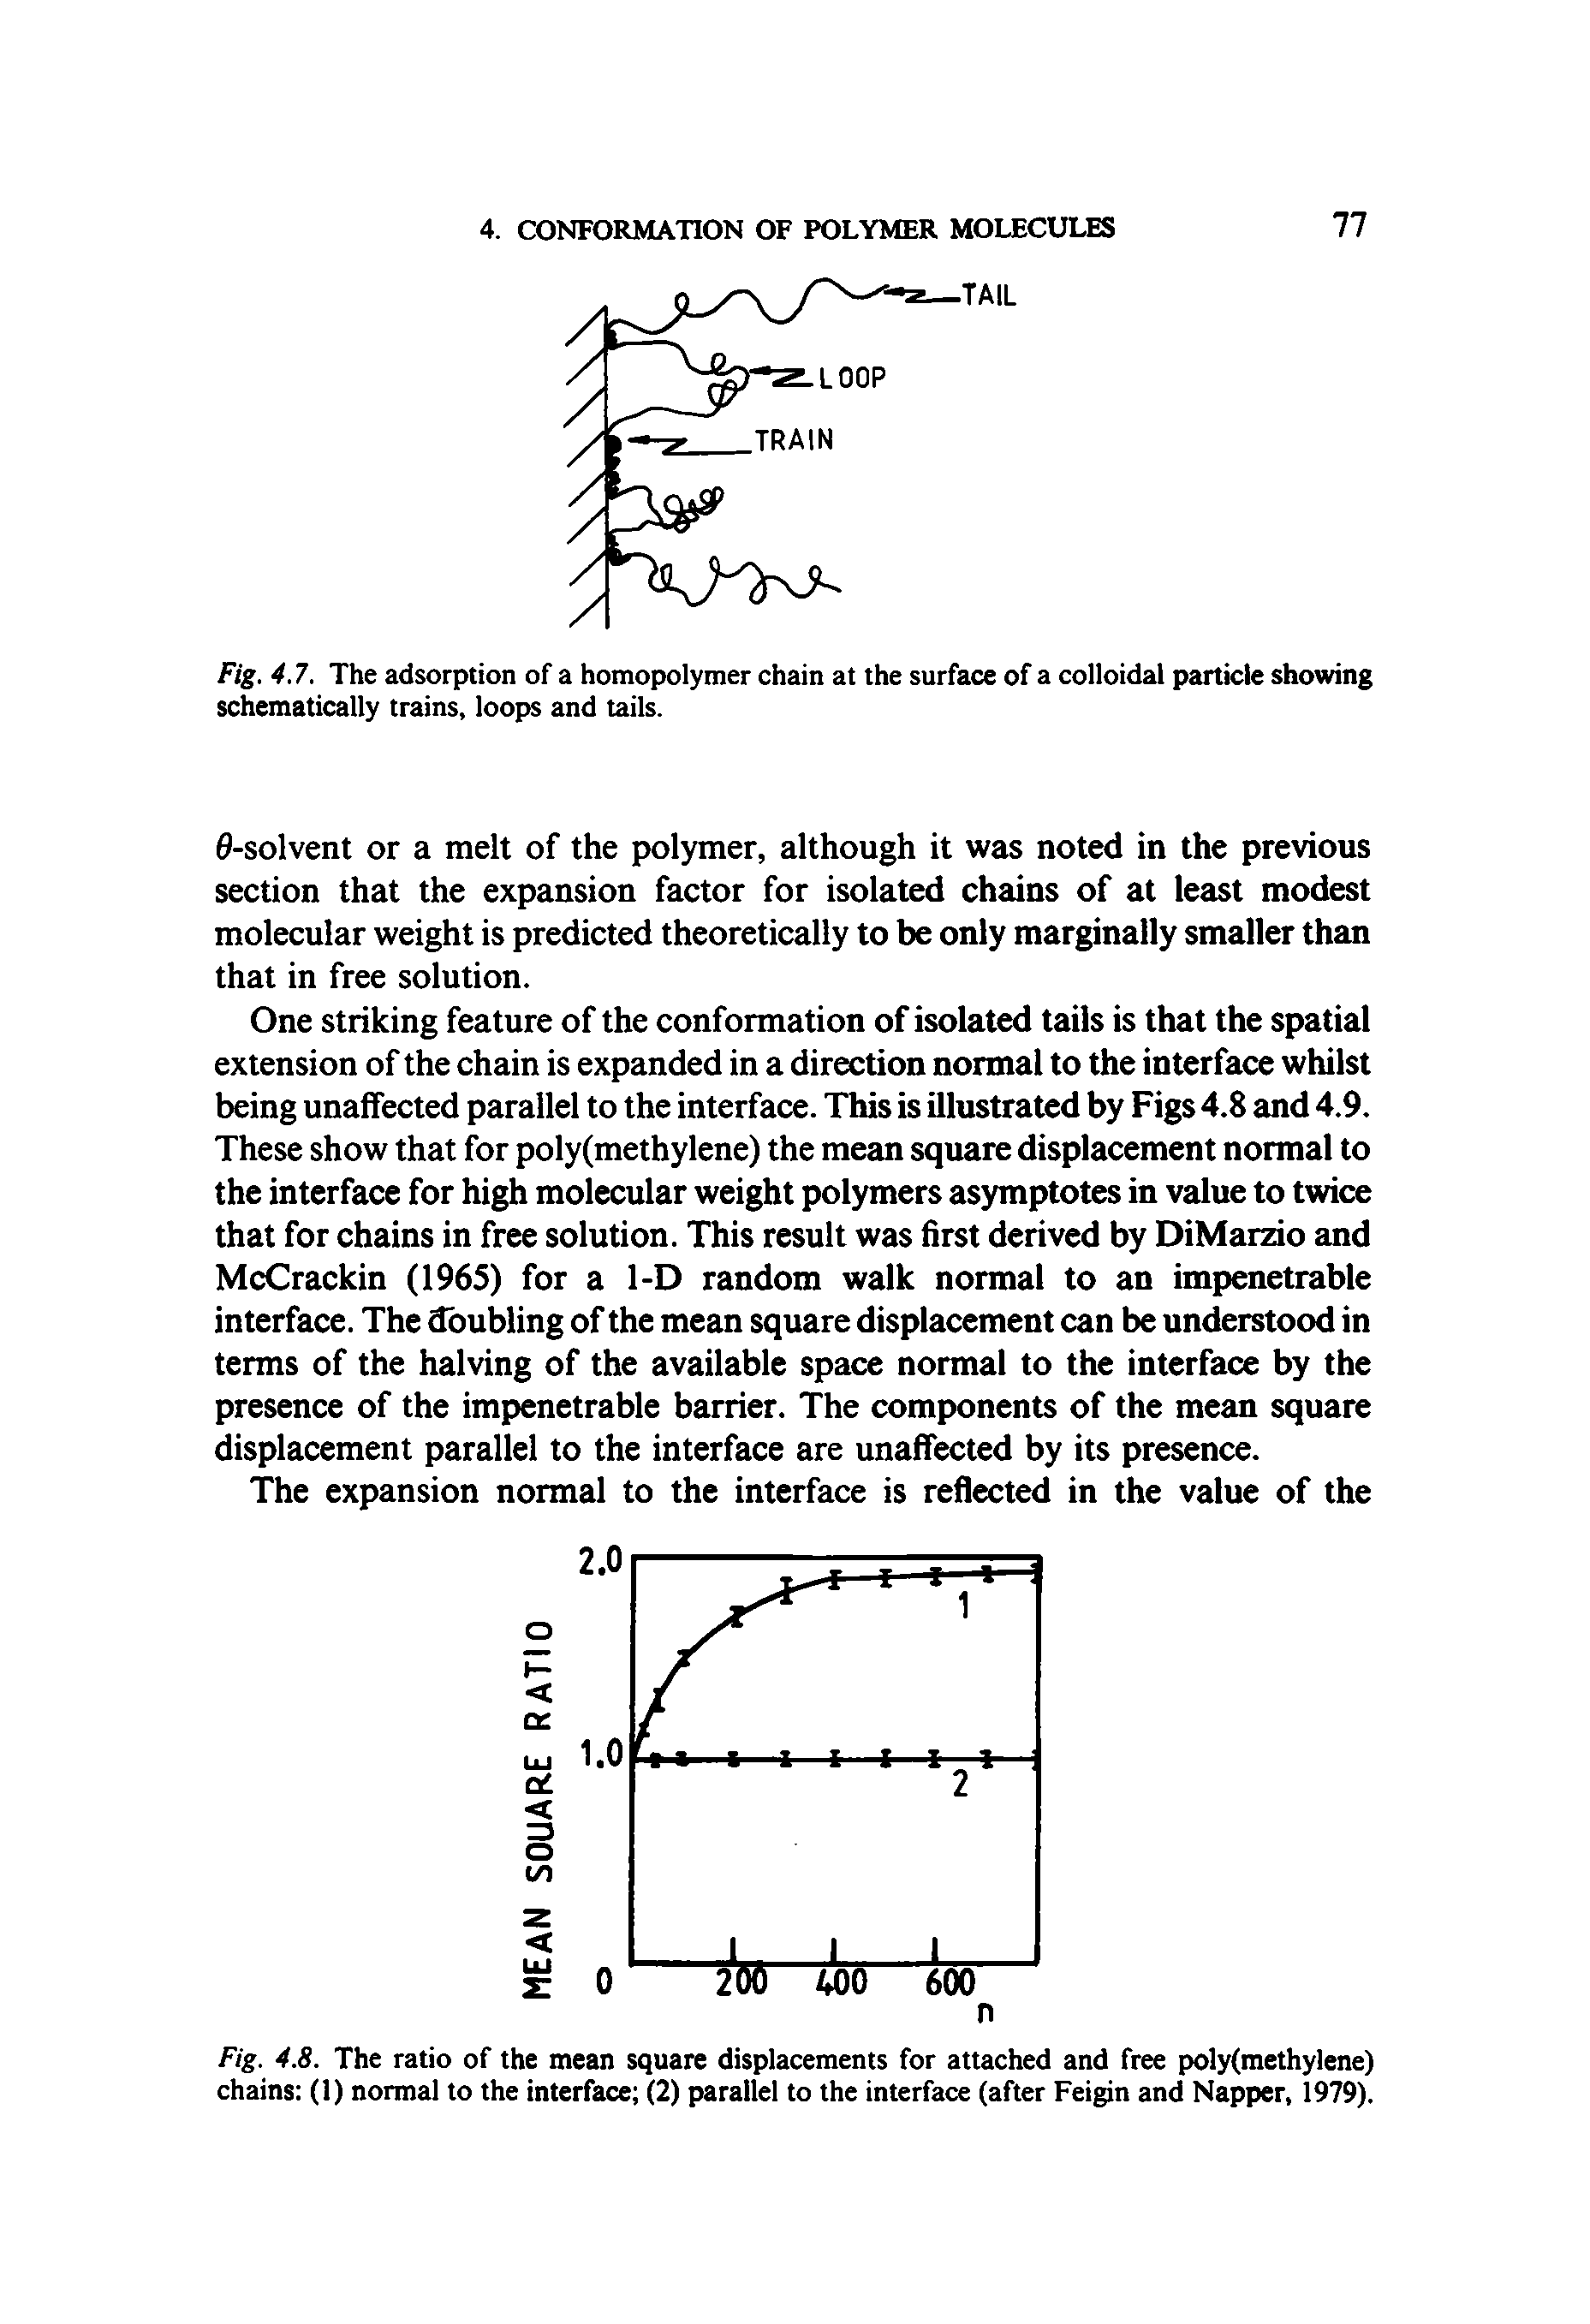 Fig. 4.8. The ratio of the mean square displacements for attached and free poly(methylene) chains (1) normal to the interface (2) parallel to the interface (after Feigin and Napper, 1979).